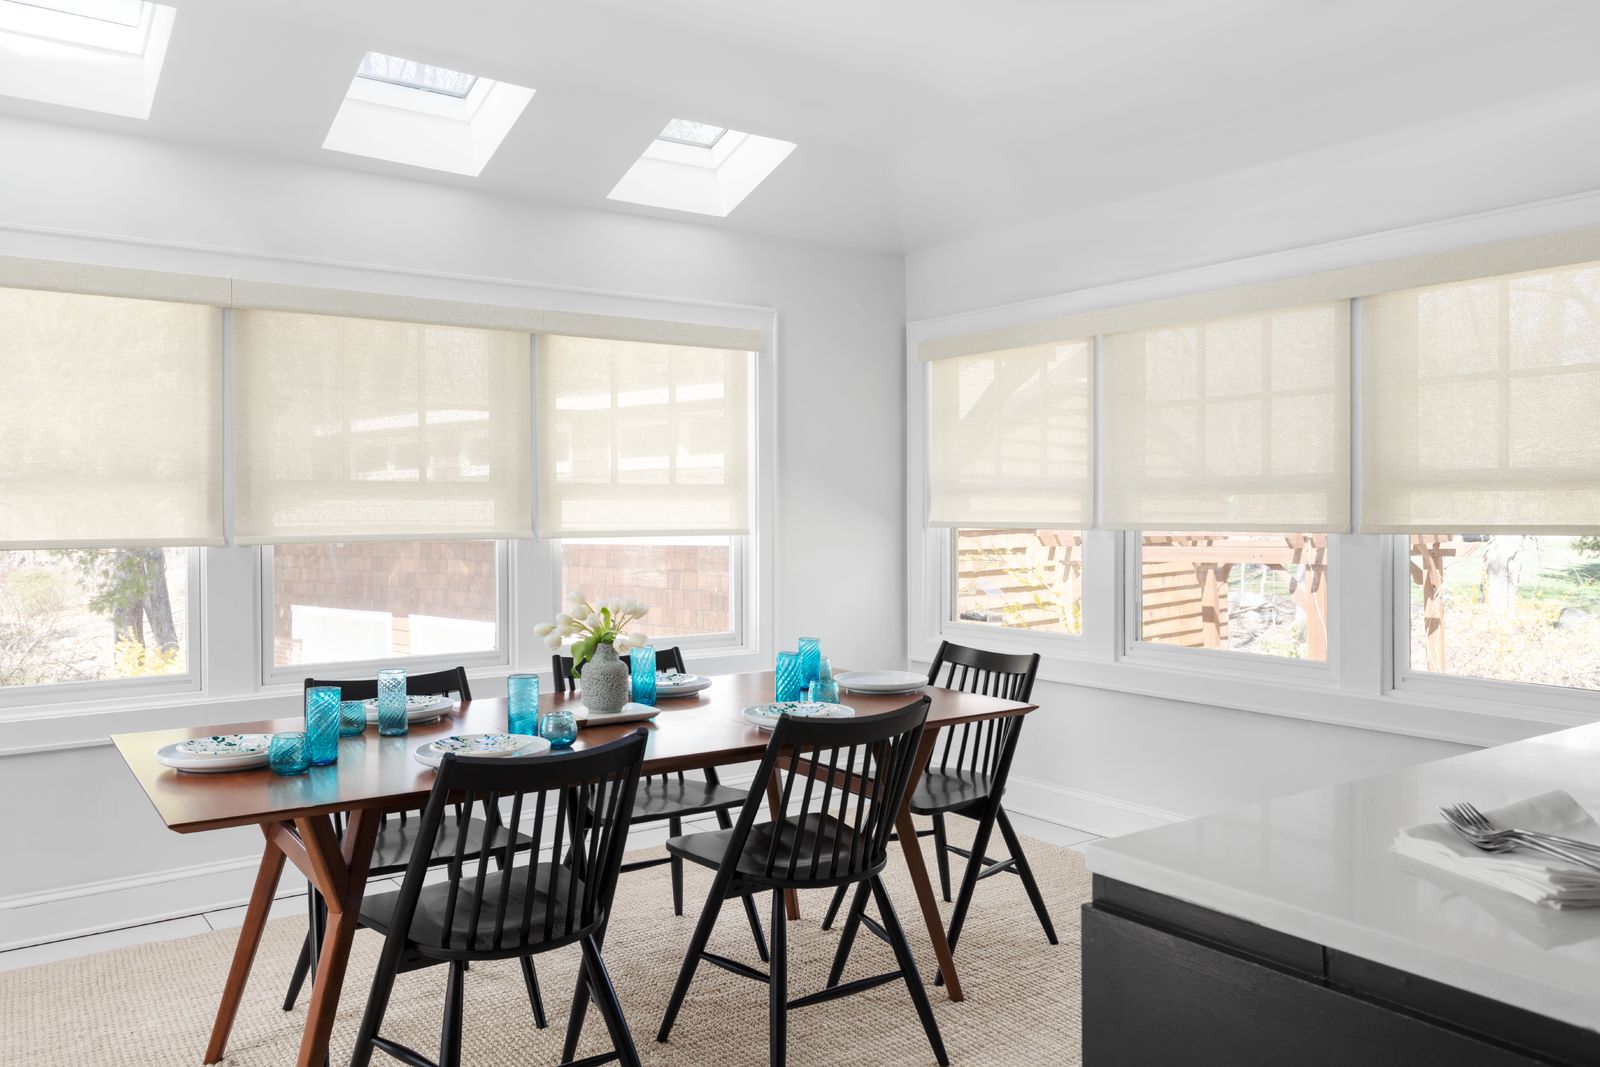 A solar shade blocks the harsh sun yet allows light and a view to come through a wall of windows in a modern dining room.